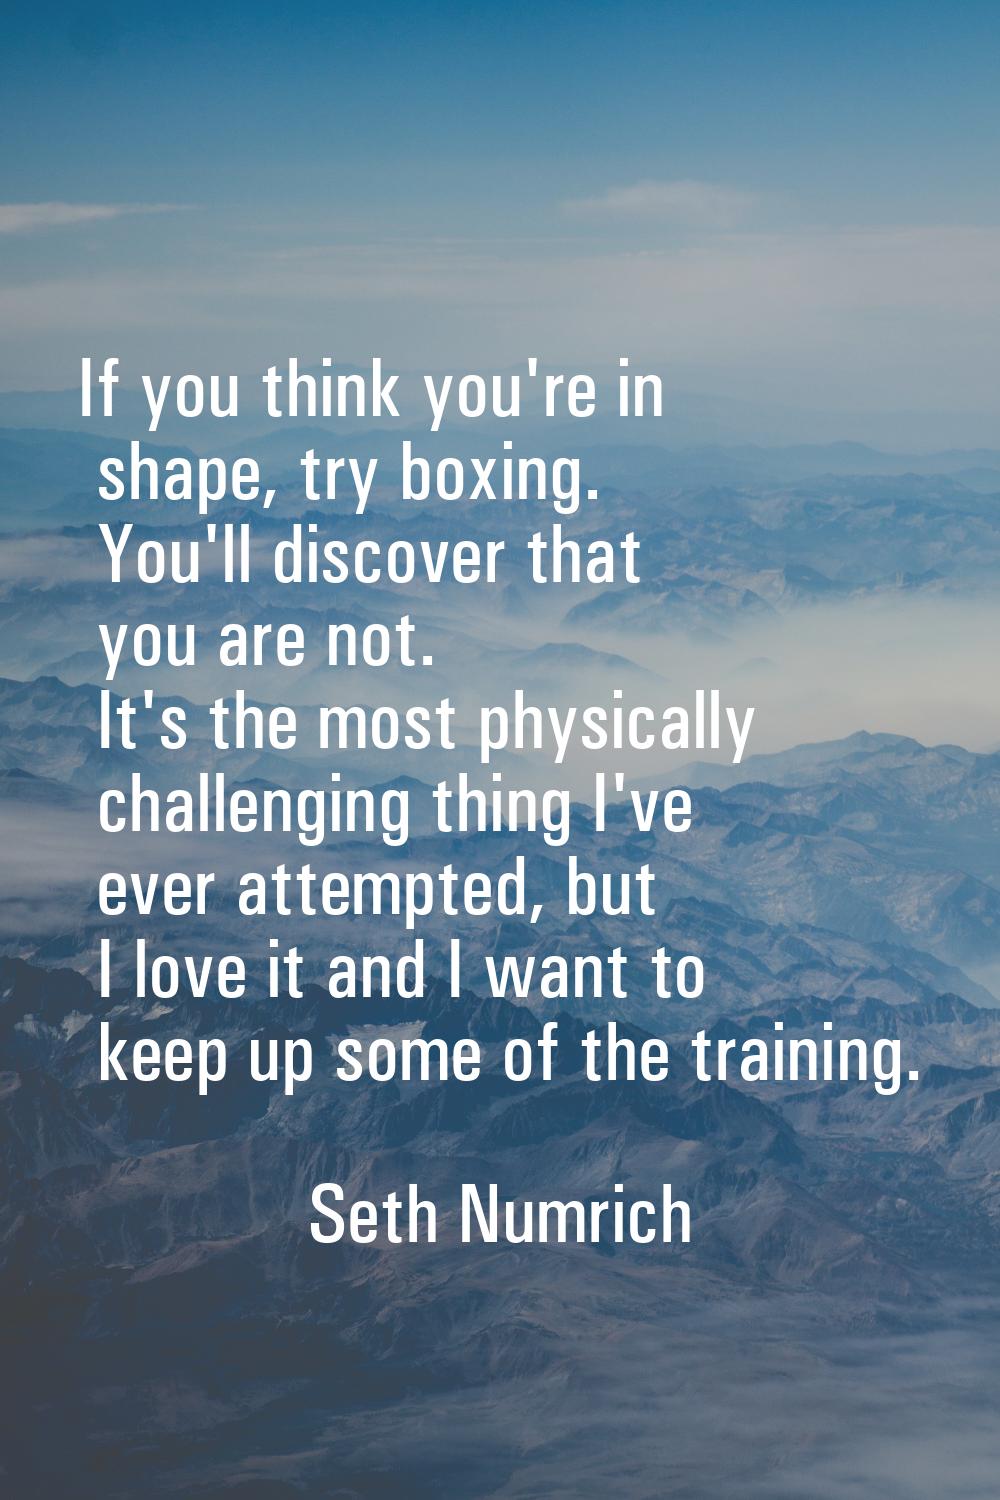 If you think you're in shape, try boxing. You'll discover that you are not. It's the most physicall